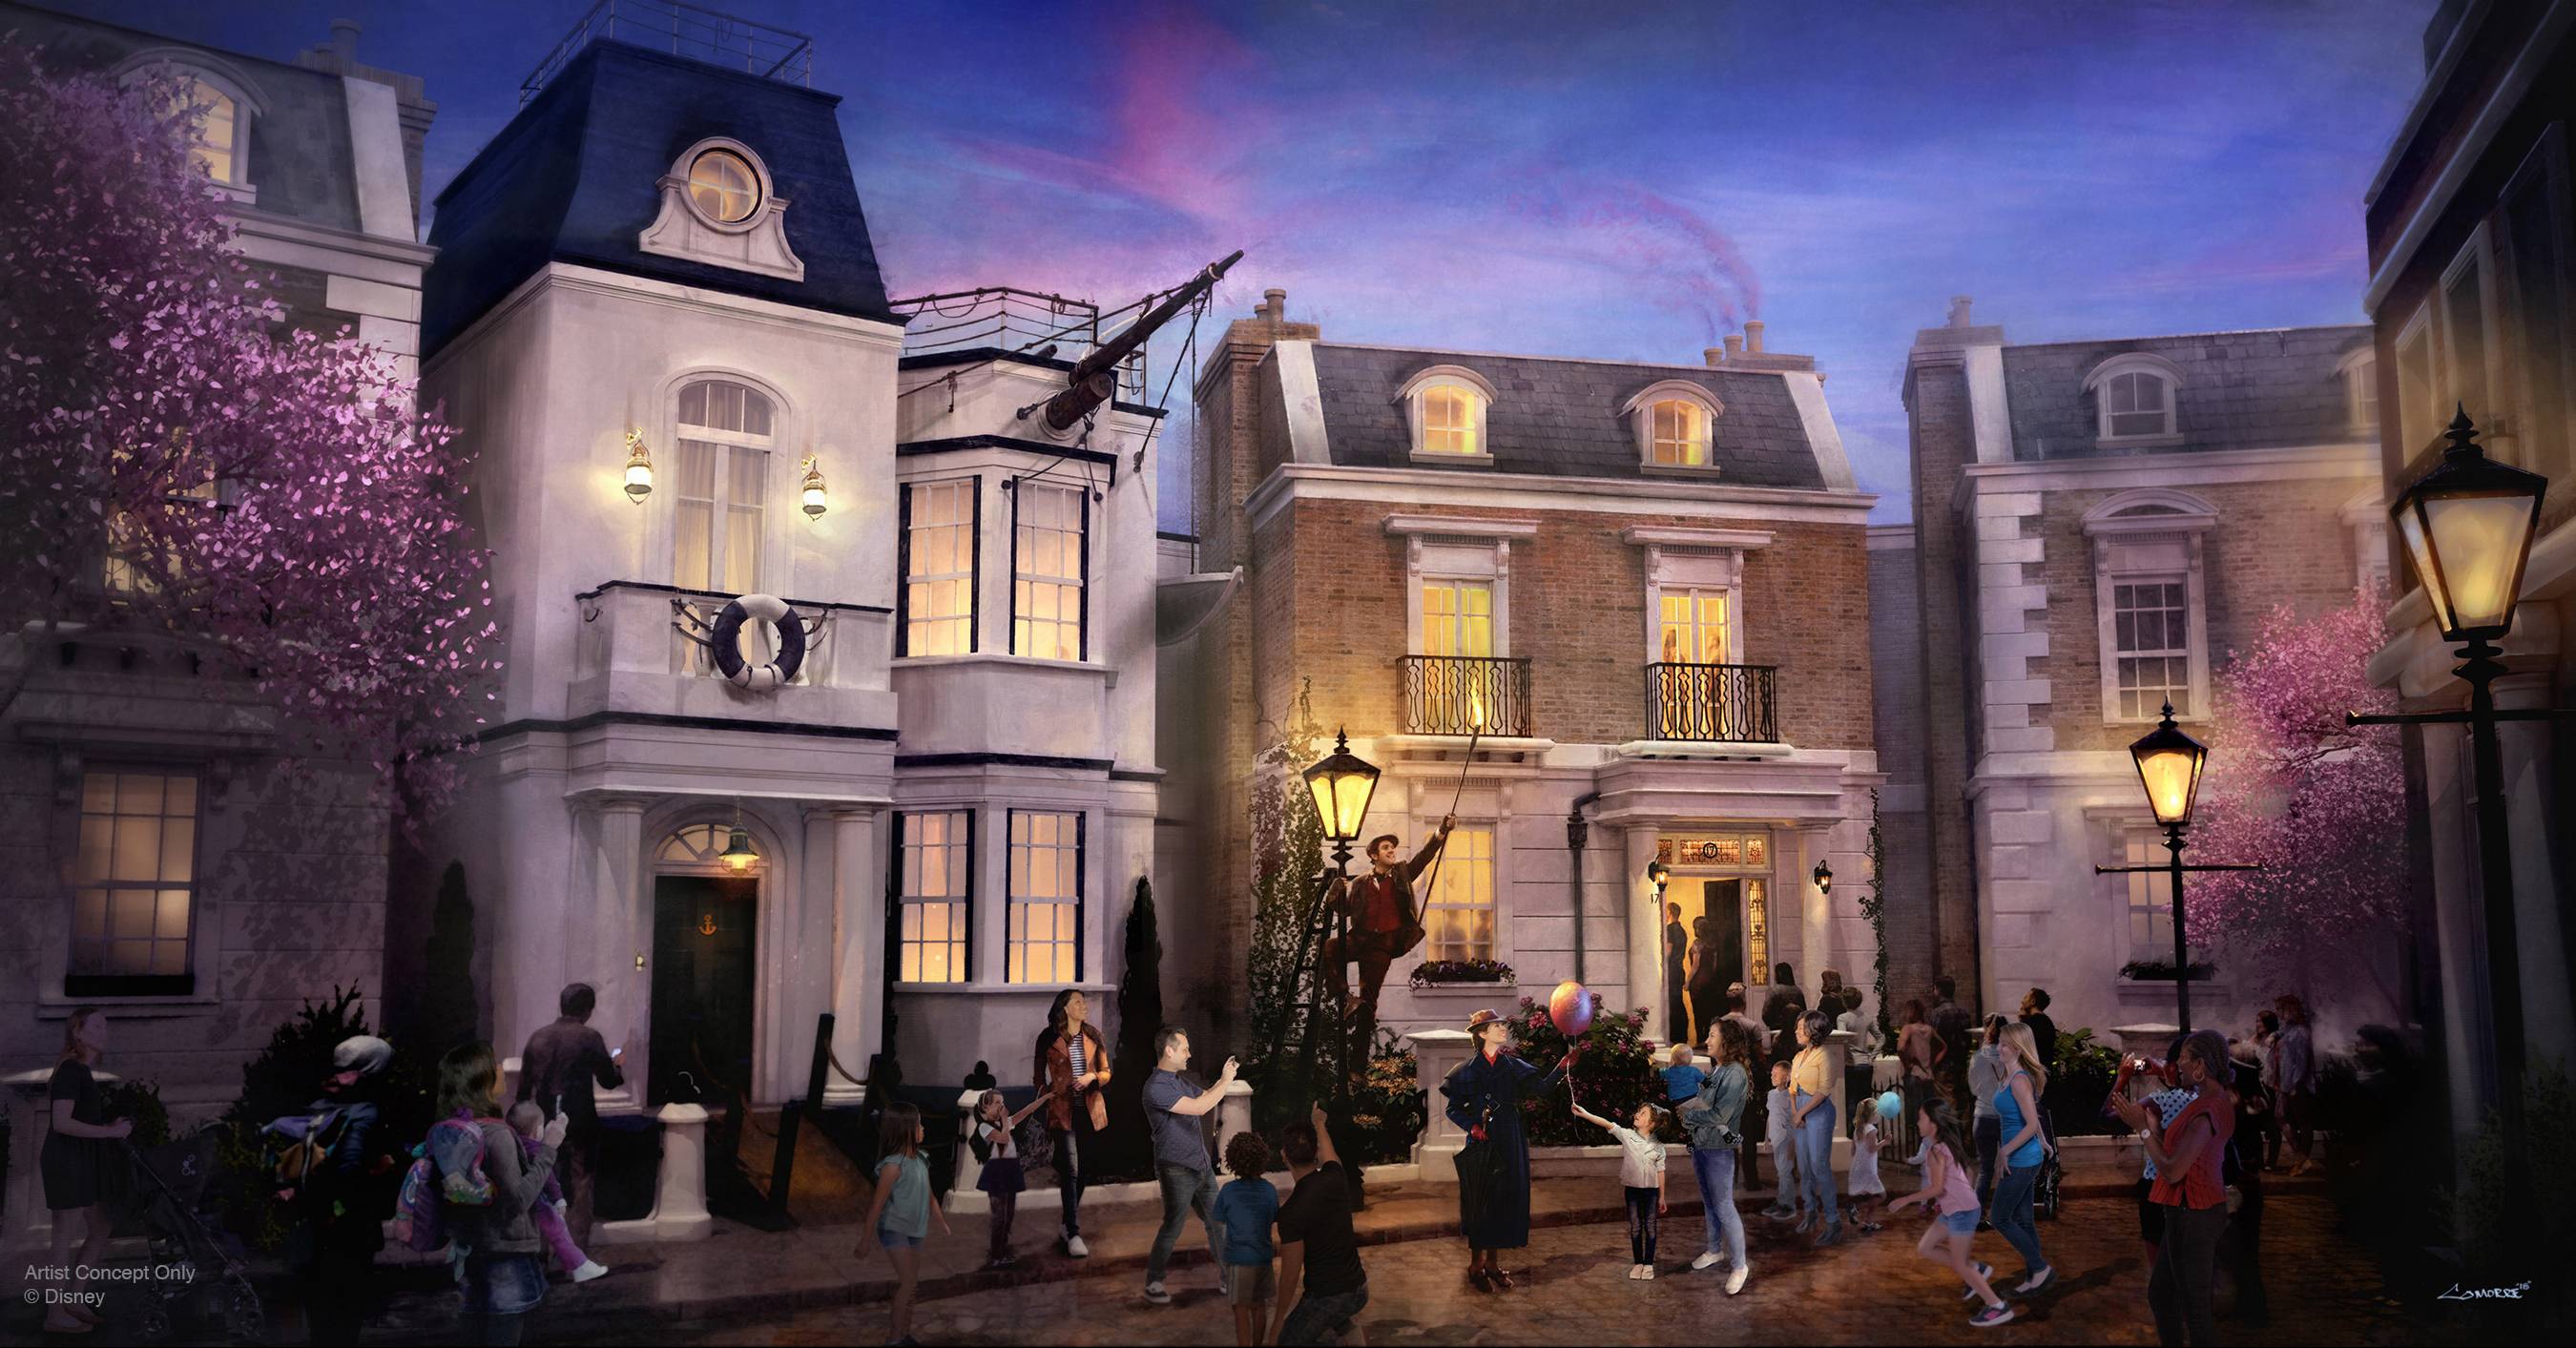 Disney confirms Mary Poppins neighborhood and attraction coming to Epcot's World Showcase